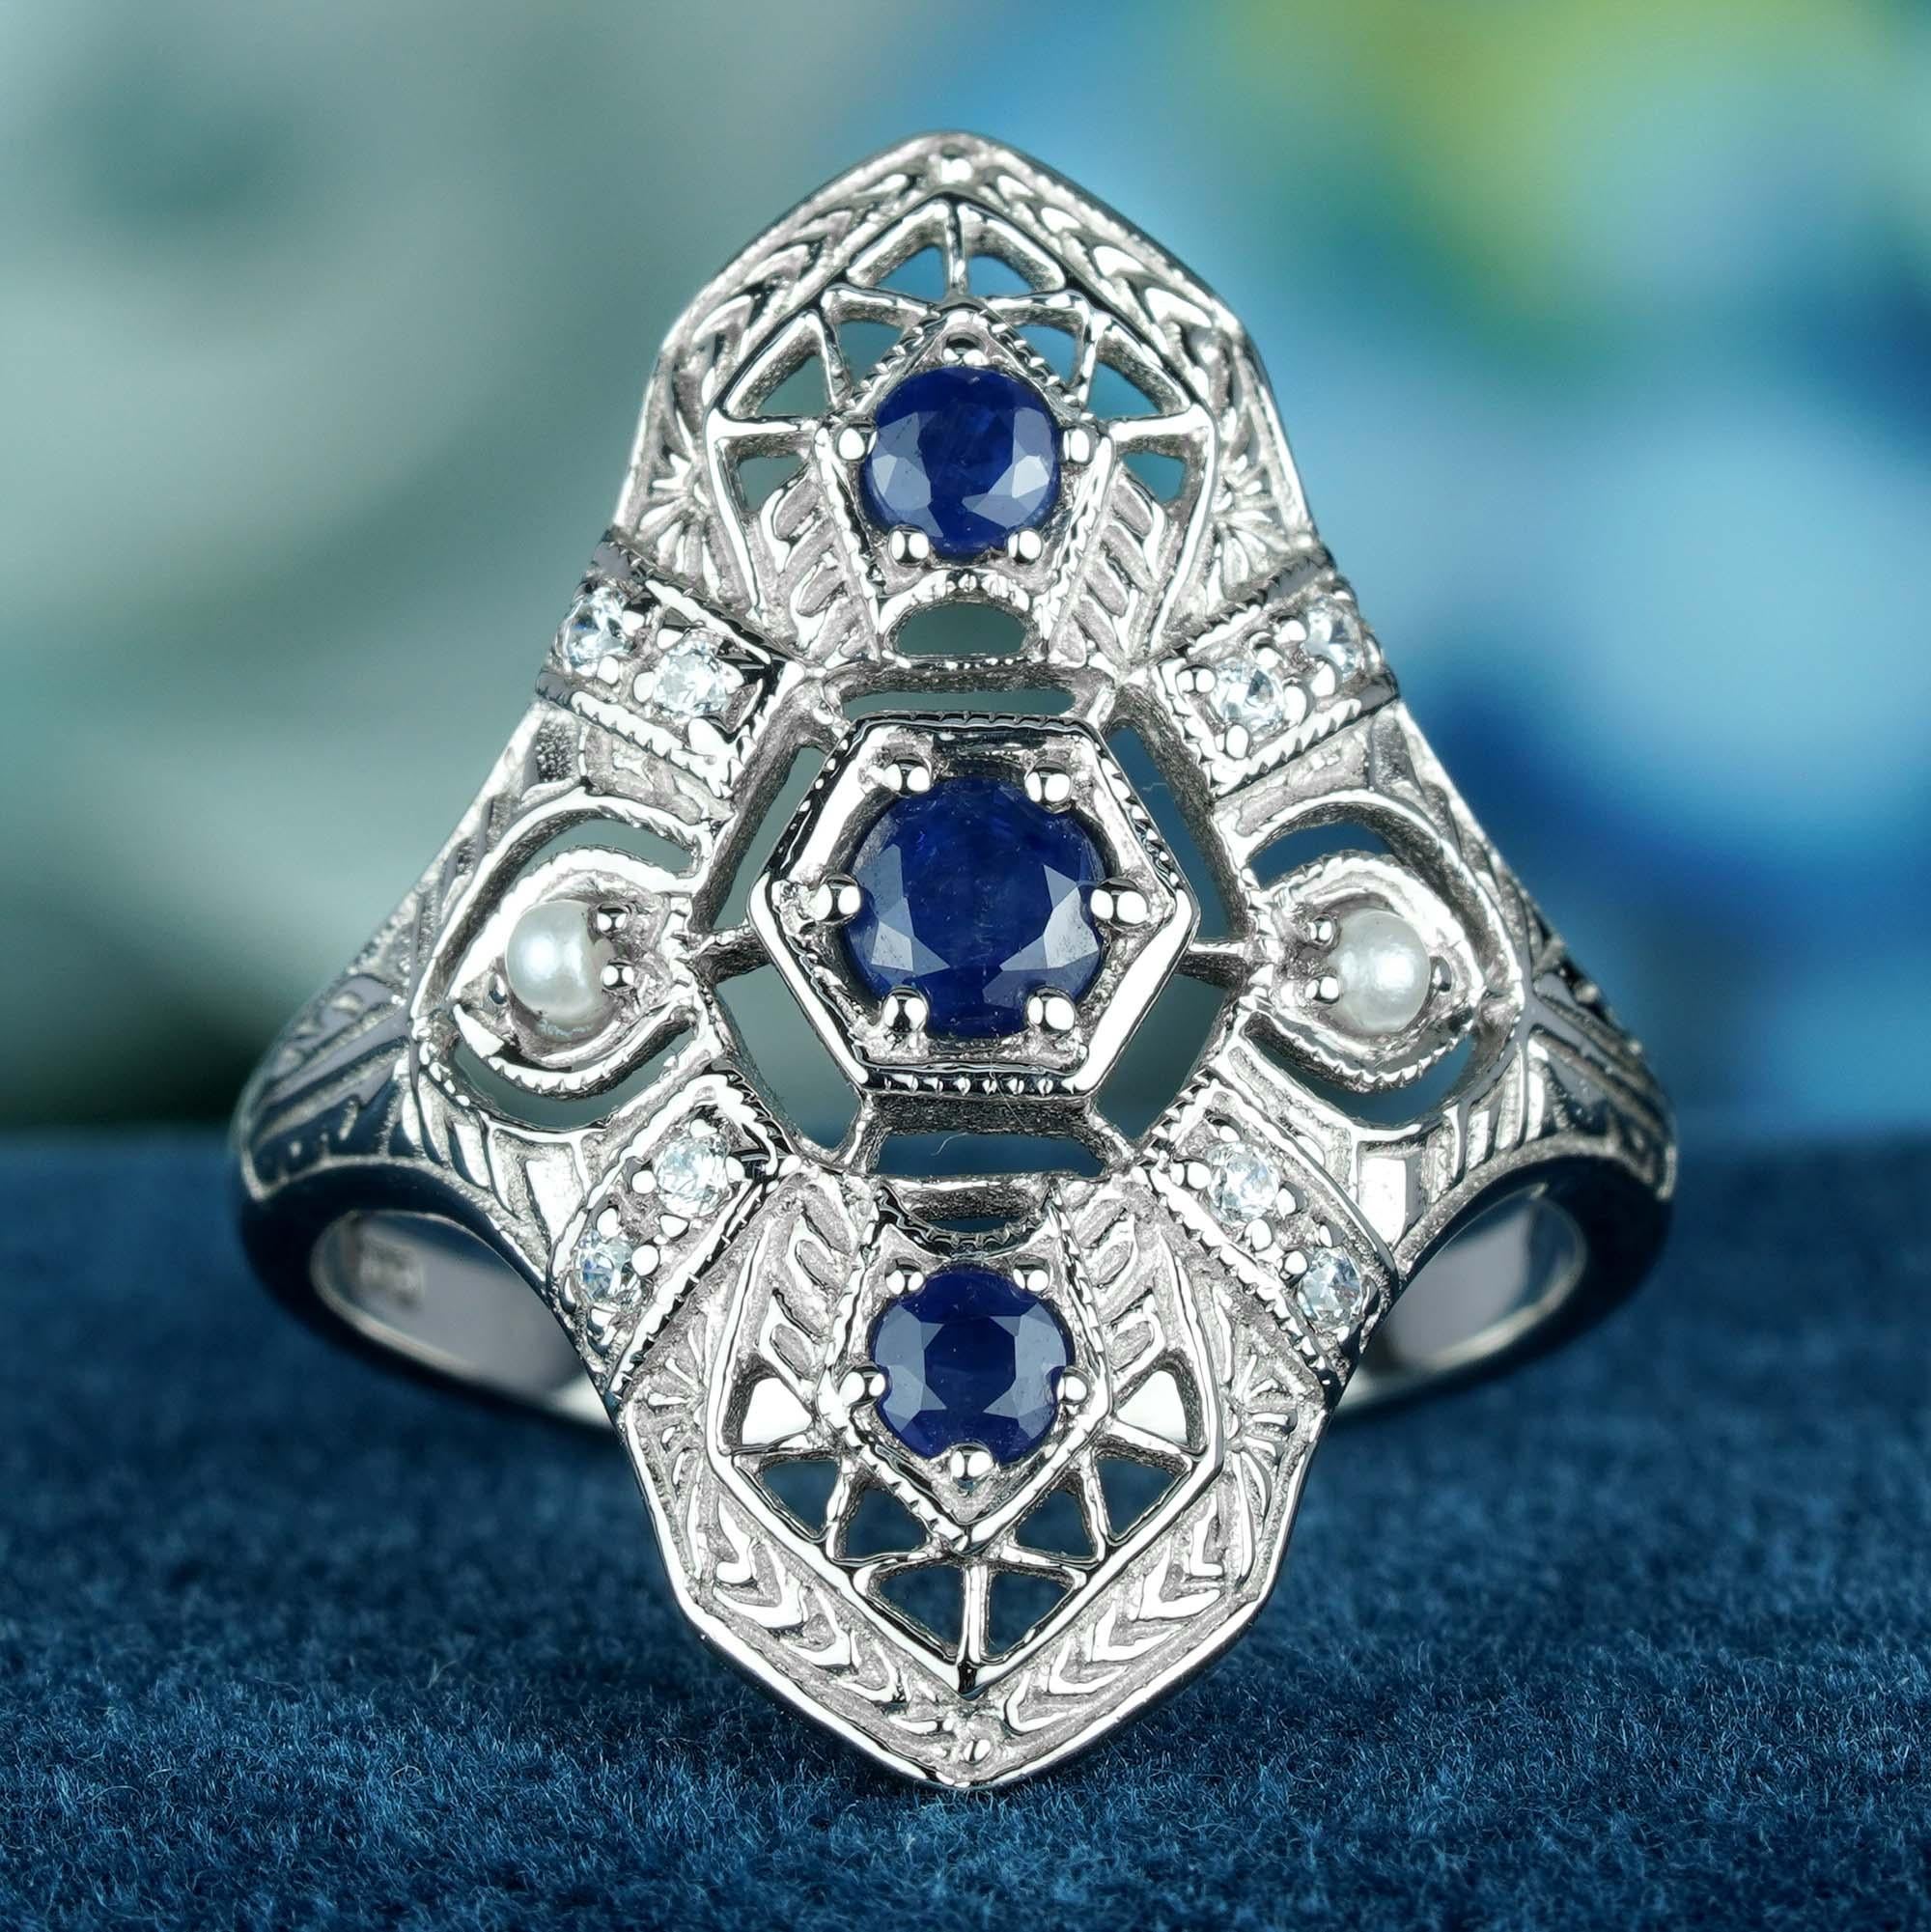 This Art Deco vintage-style ring. It features a central 3 cascading cluster of round blue sapphire set in a raised bezel, with delicate filigree work adorning the solid white gold band and shoulders adds a touch of romance to the ring. The sapphires